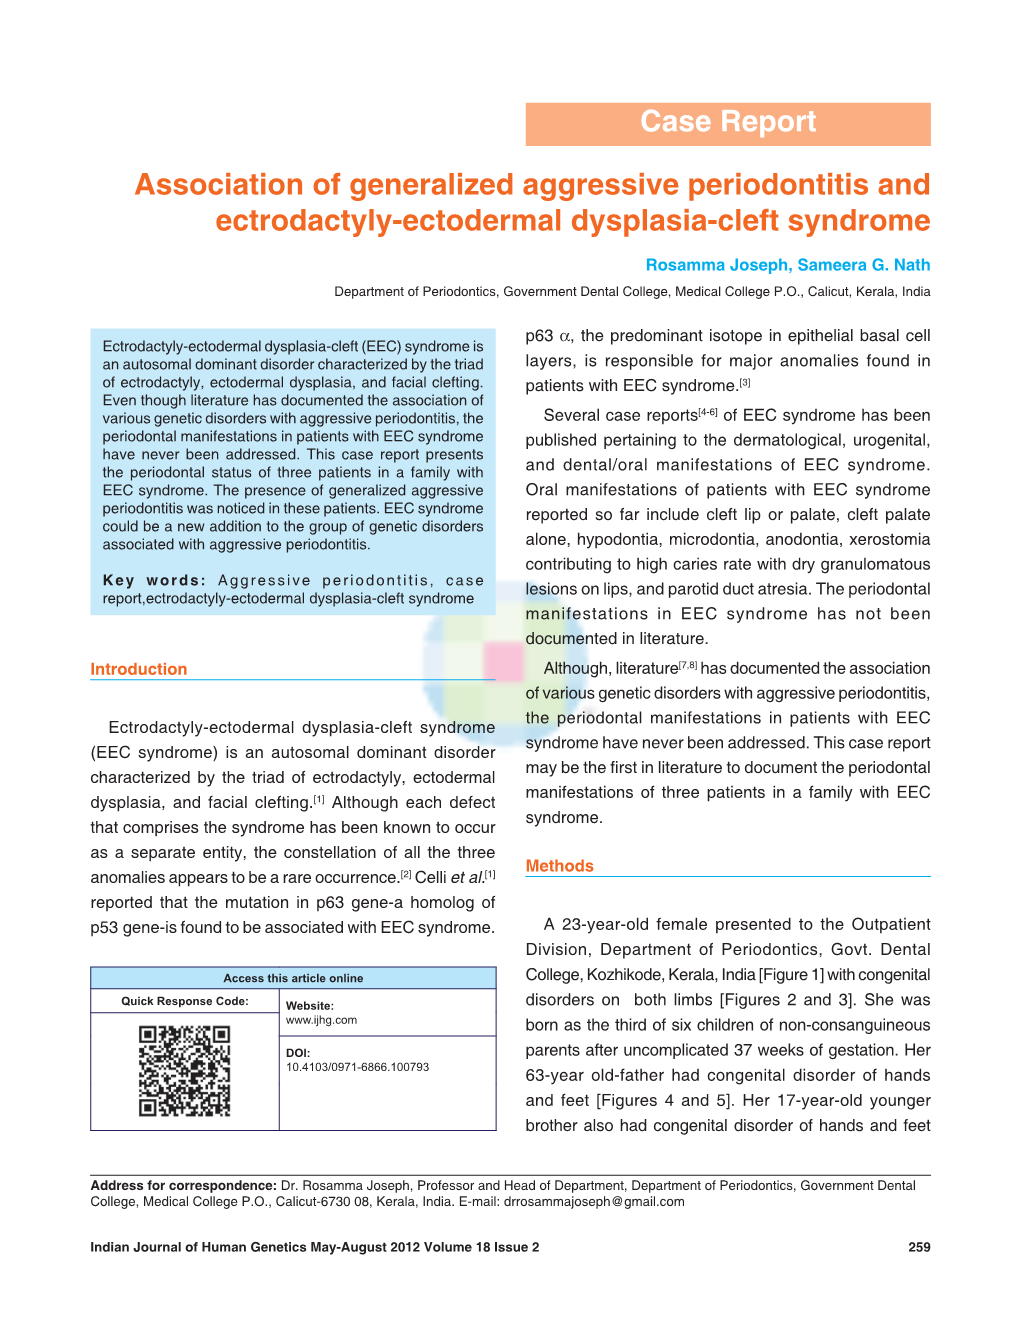 Association of Generalized Aggressive Periodontitis and Ectrodactyly-Ectodermal Dysplasia-Cleft Syndrome